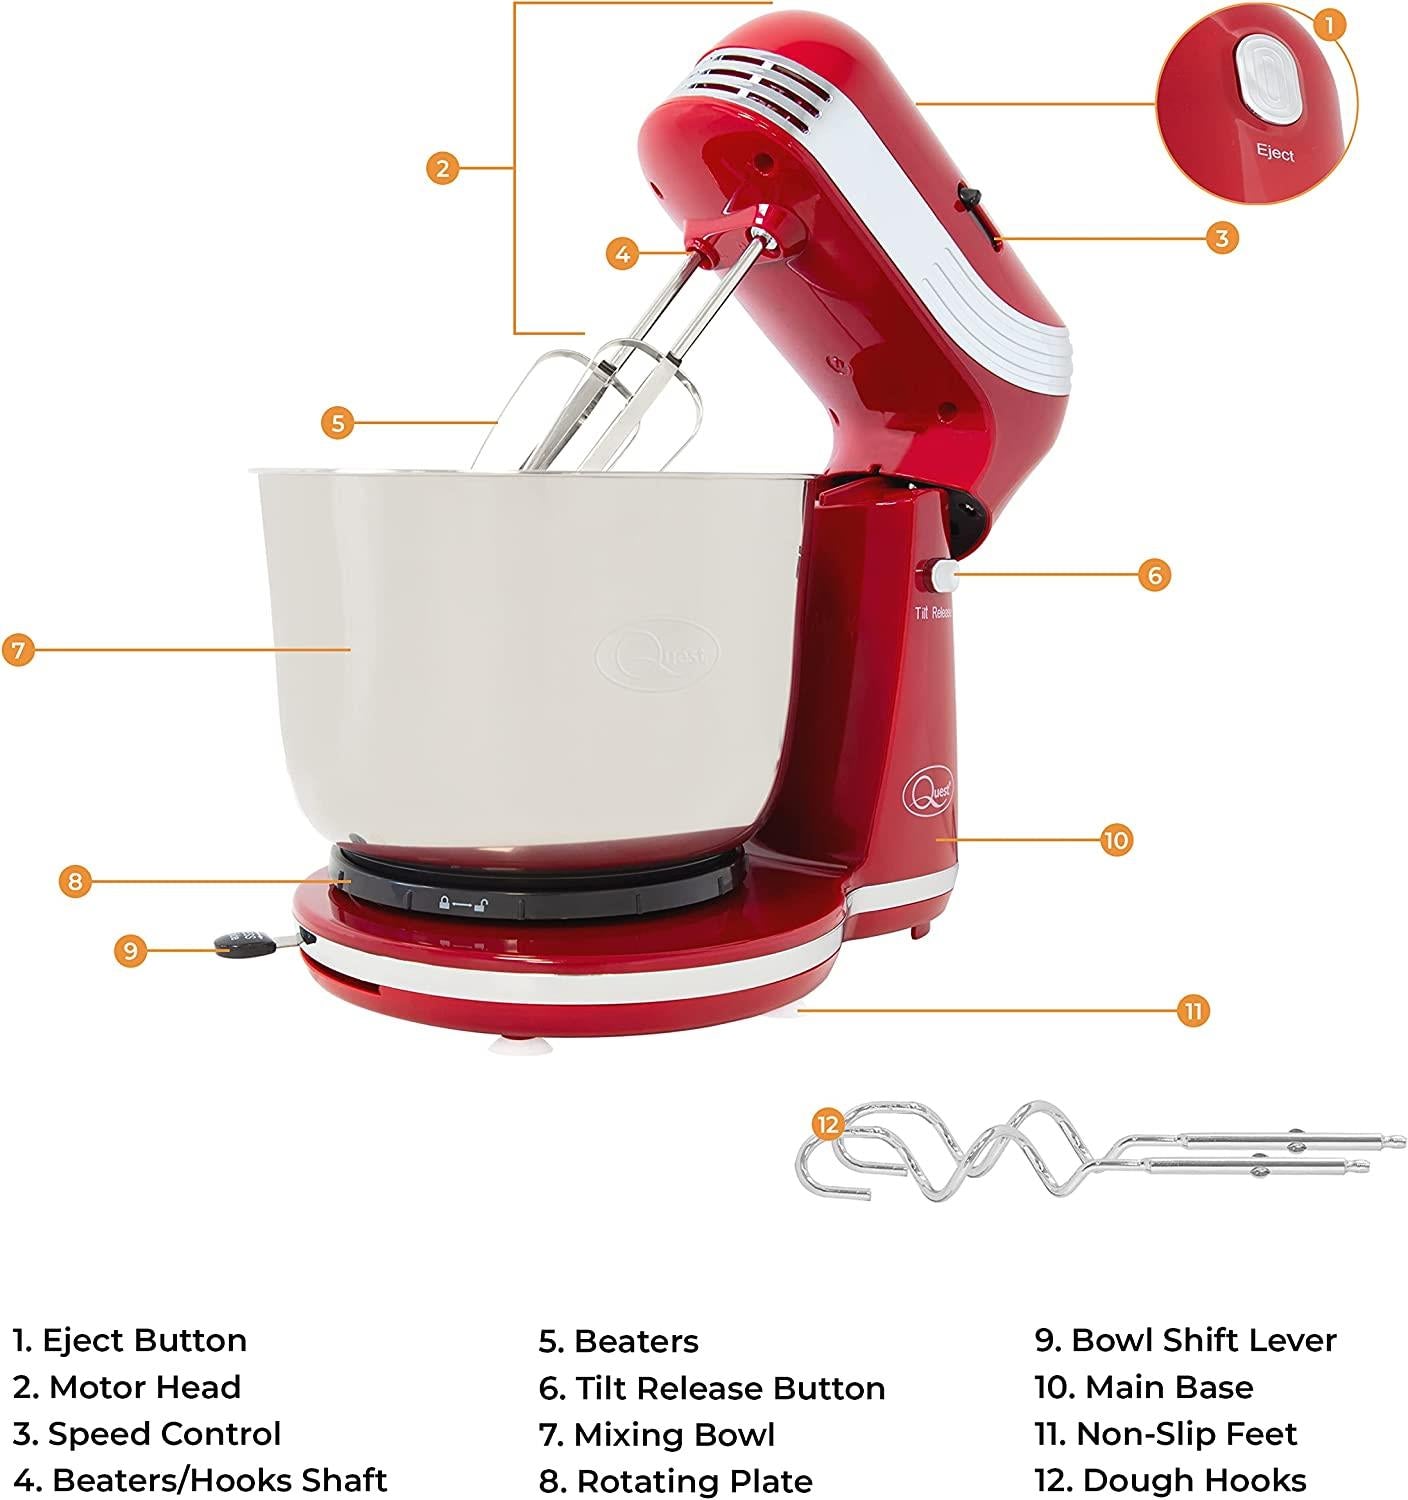 Quest Compact Stand Mixer - 6 Speed - Red (Carton of 4)